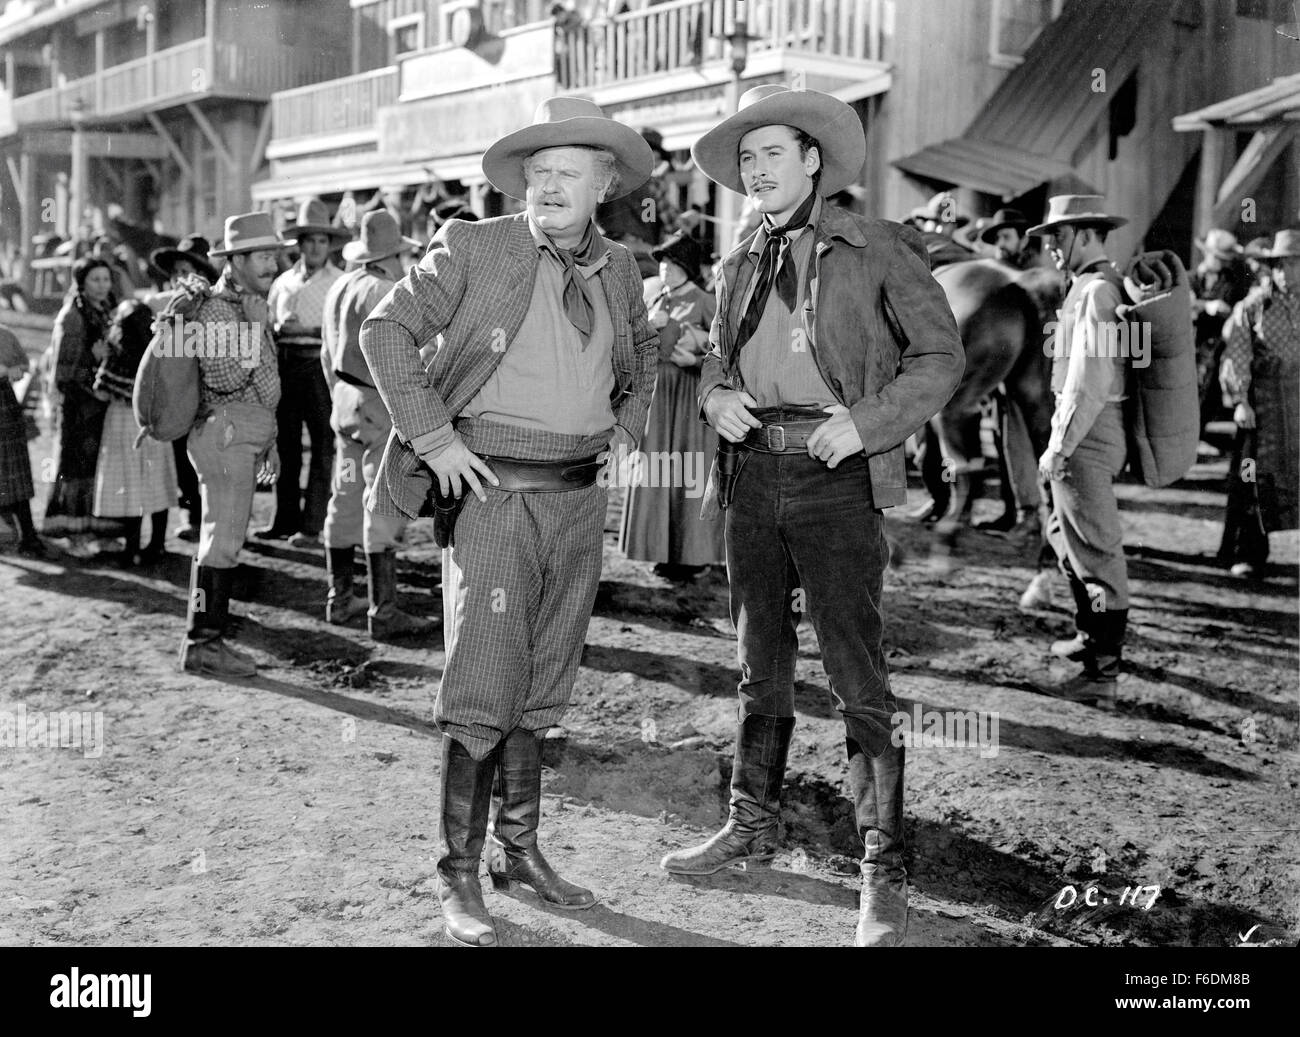 RELEASE DATE: April 8, 1939. MOVIE TITLE: Dodge City. STUDIO: Warner Bros. Pictures. PLOT: Dodge City. A wide-open cattle town run by Jeff Surrett. Even going on a children's Sunday outing is not a safe thing to do. What the place needs is a fearless honest Marshal. A guy like Wade Hatton, who helped bring the railroad in. It may not help that he fancies Abbie Irving, who won't have anything to do with him since he had to shoot her brother. But that's the West. PICTURED: ERROL FLYNN as Wade Hatton. Stock Photo